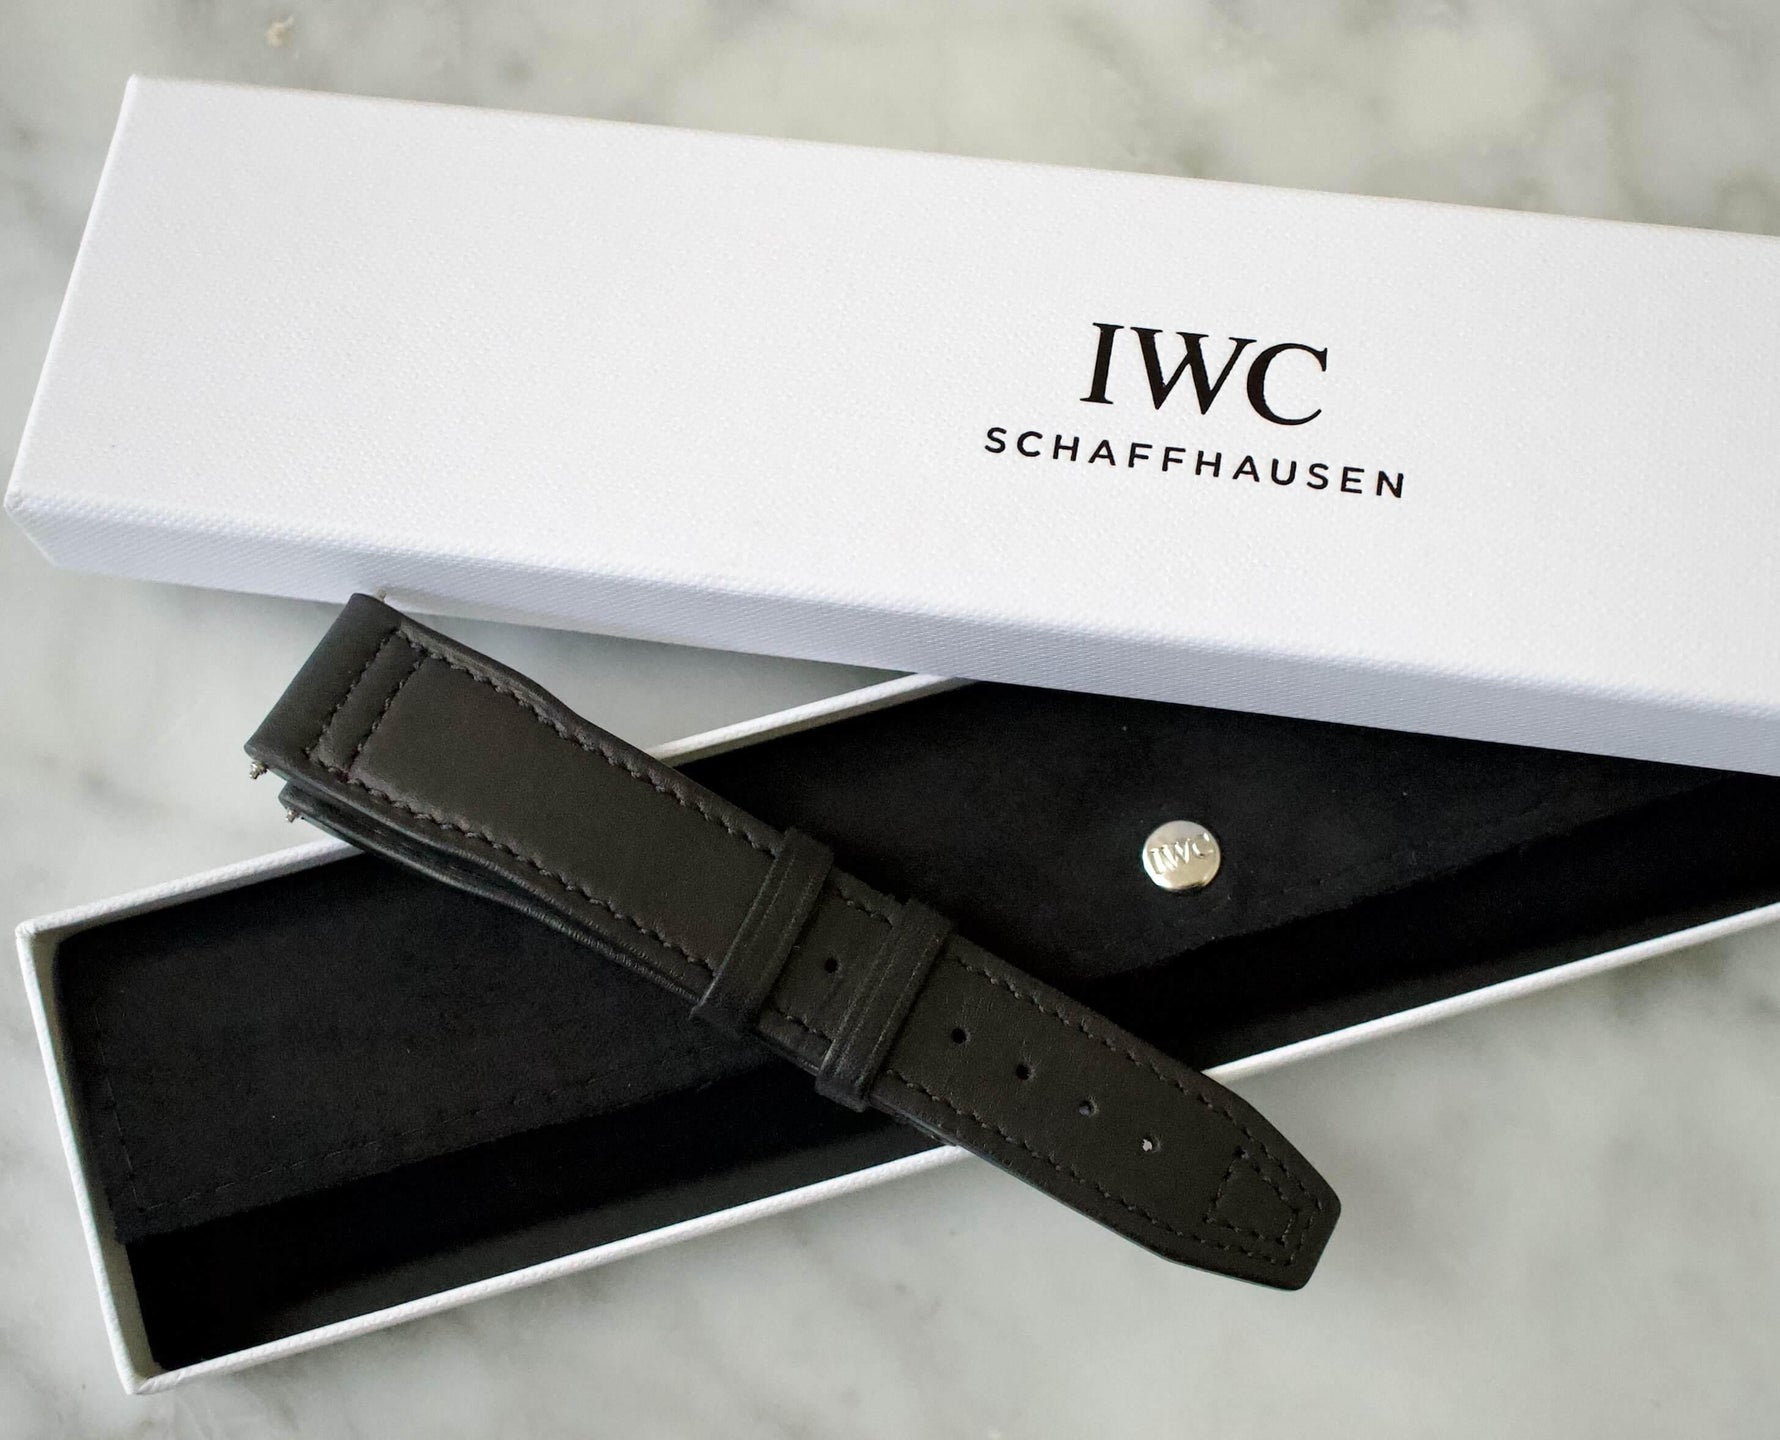 SOLD OUT: 41MM IWC PILOT’S WATCH CHRONOGRAPH TRIBUTE TO 3705 2021 BOX AND PAPERS Ceratanium AUTOMATIC - WearingTime Luxury Watches